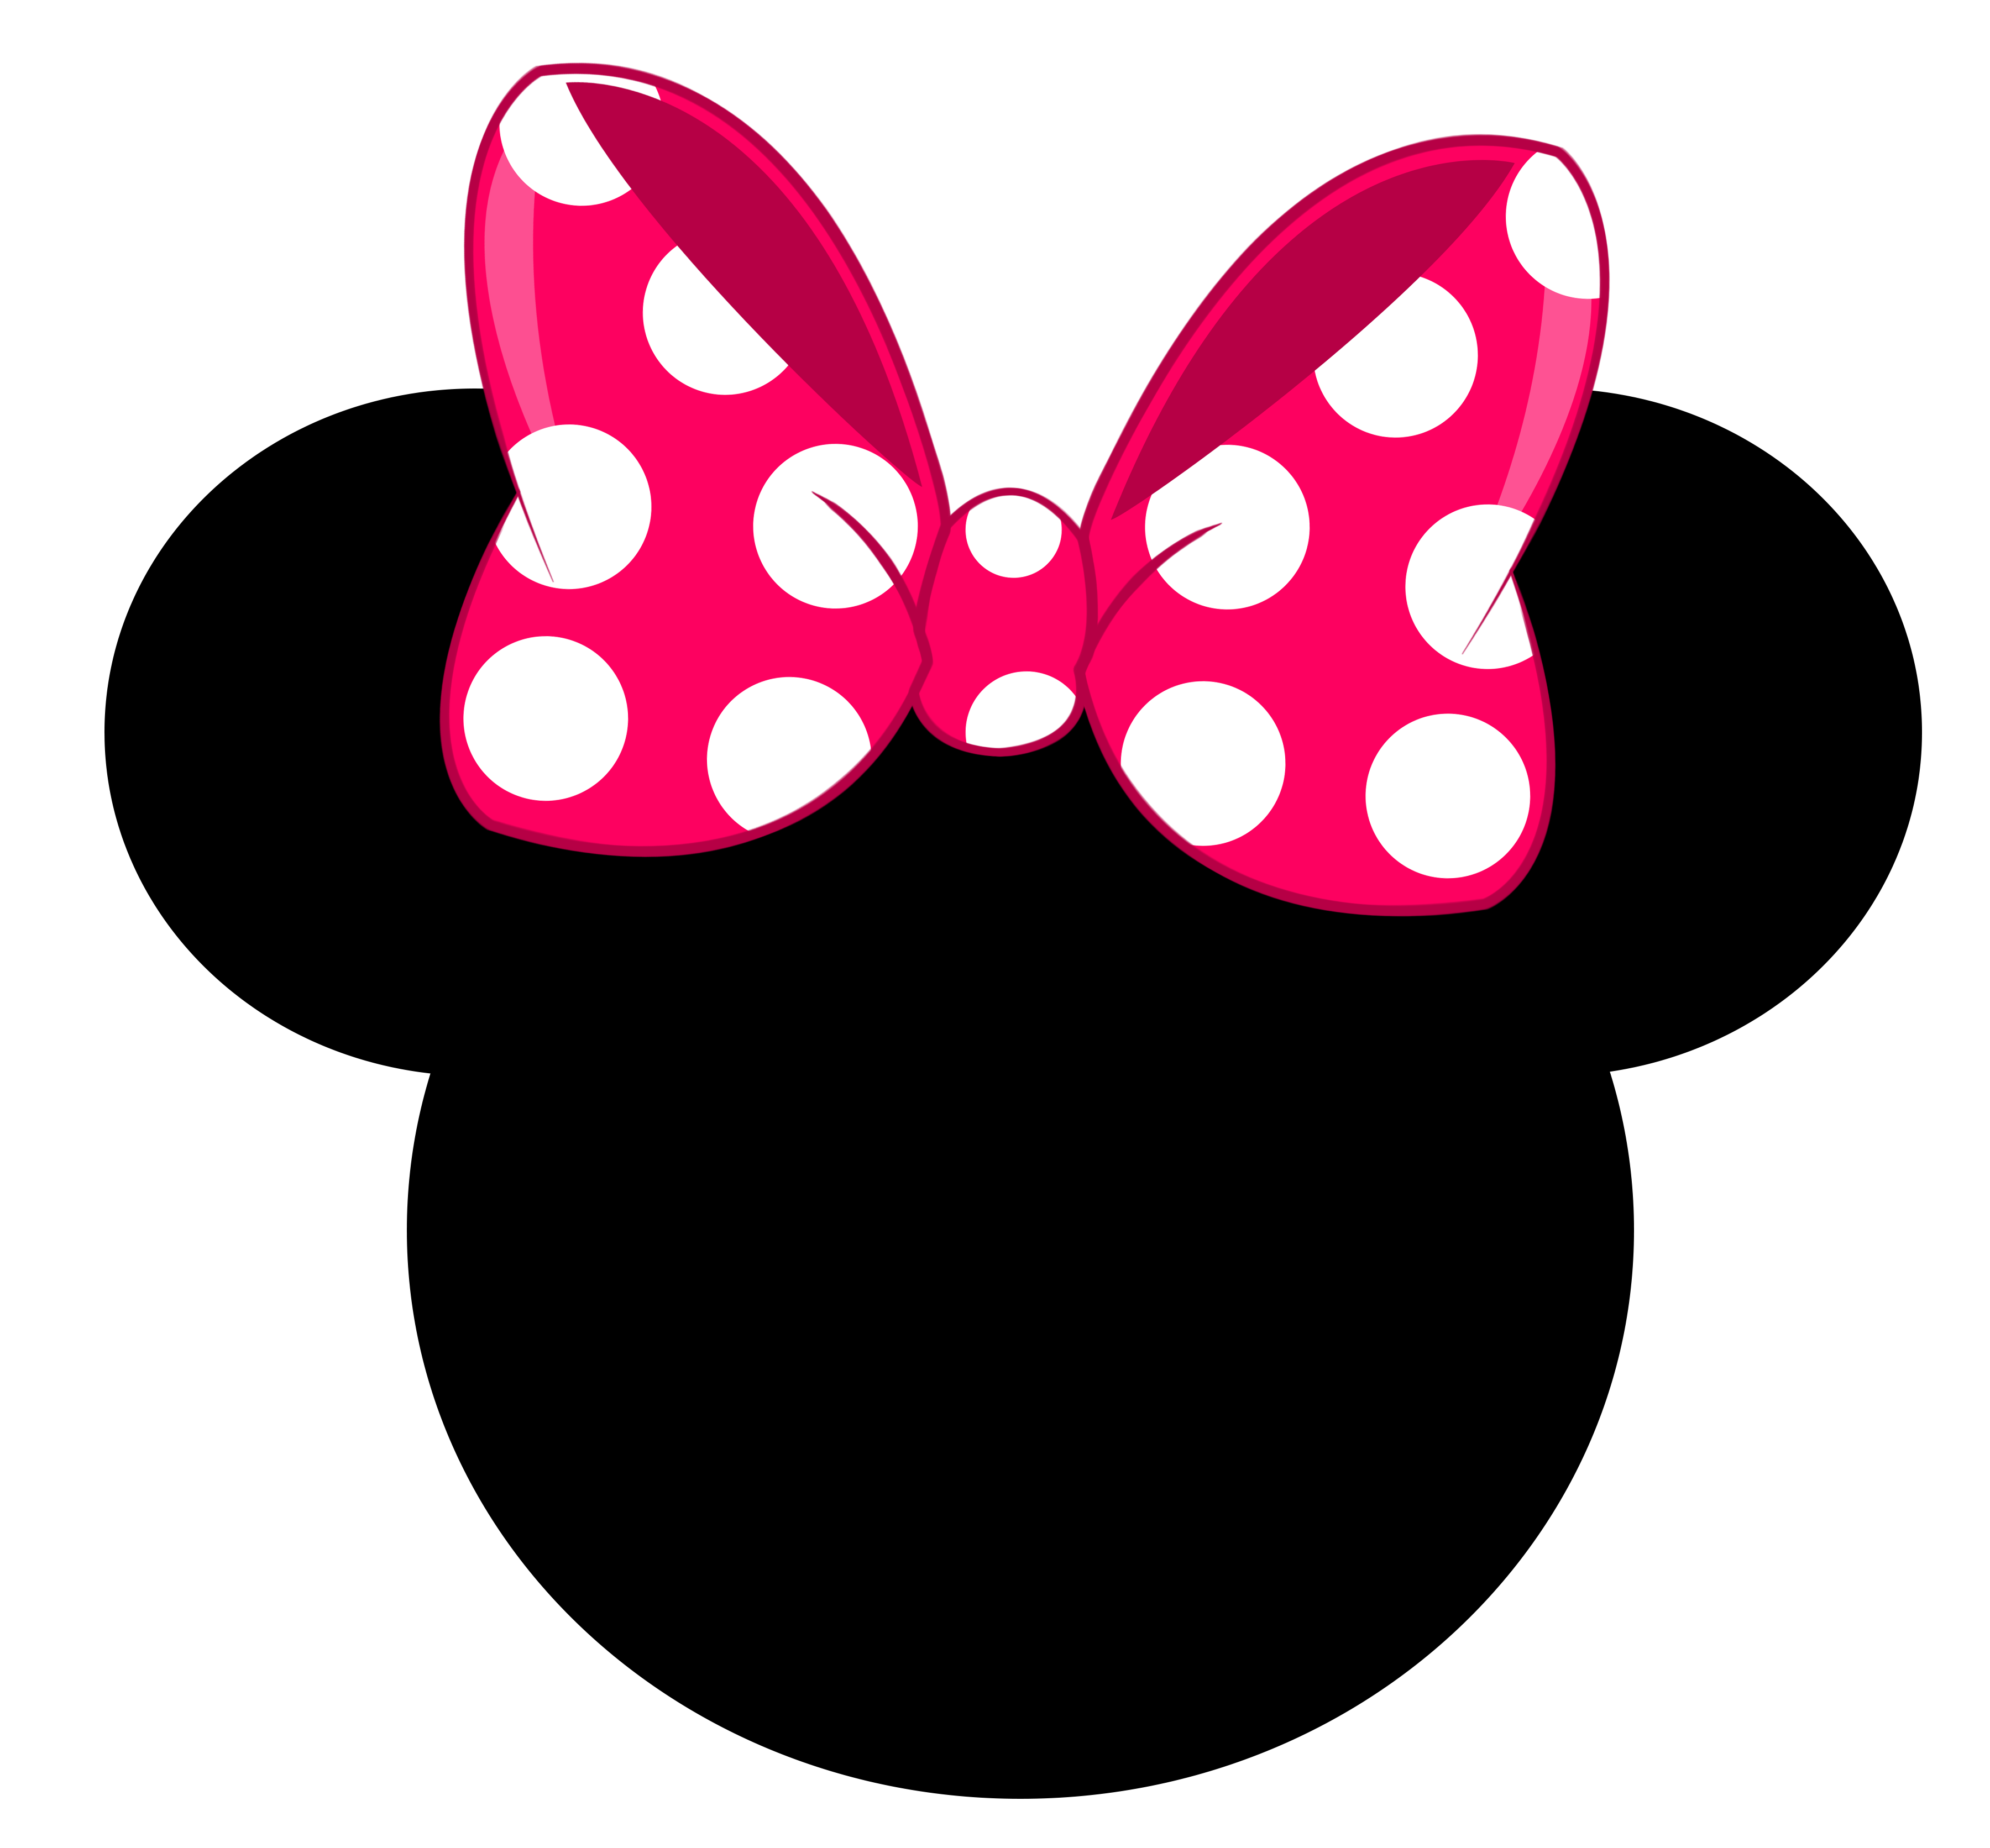 Picture #1225627 - gloves clipart minnie mouse. gloves clipart minnie mouse. 